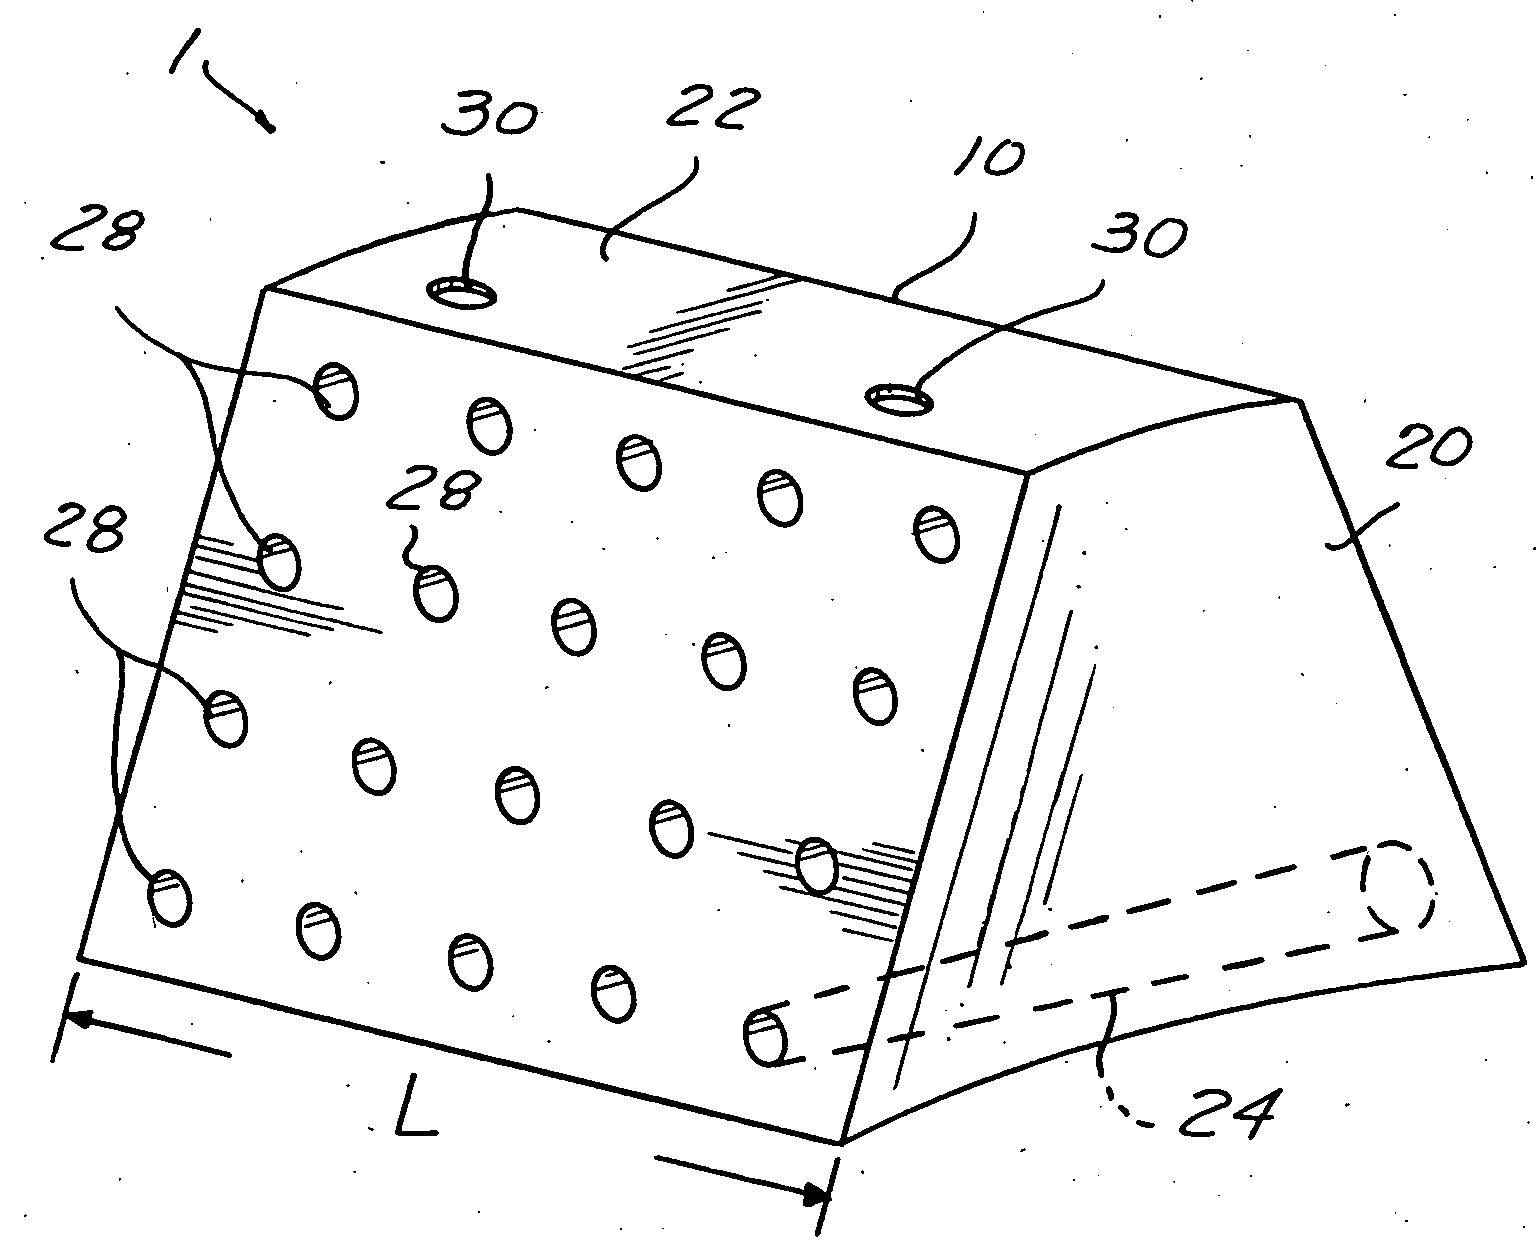 Apparatus and method for rebuilding a sand beach